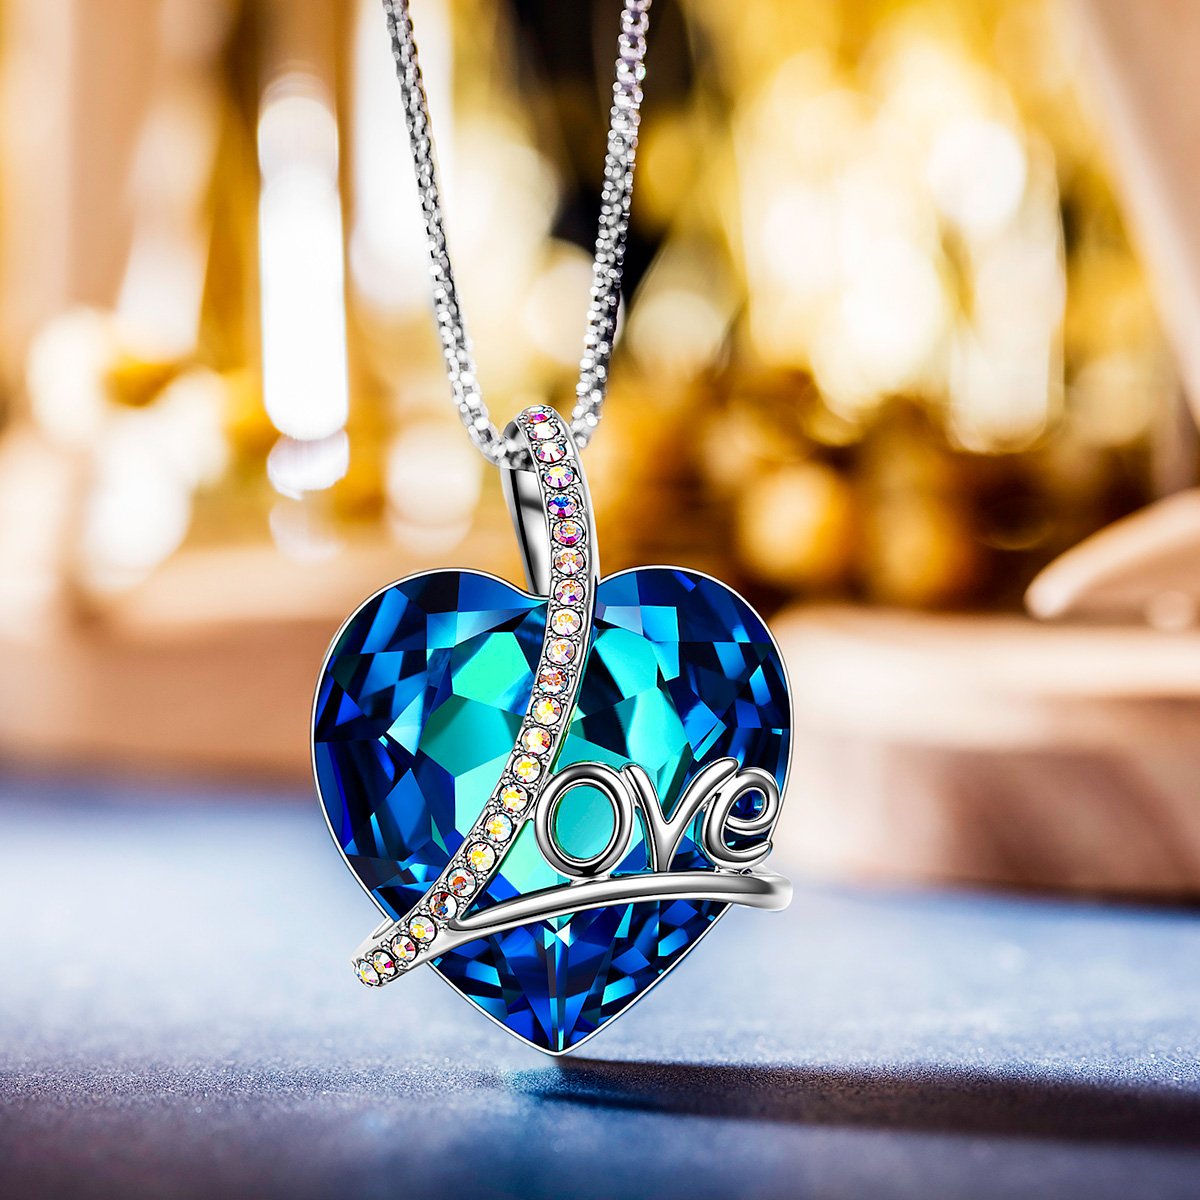 Bermuda Blue Heart Necklace in Rhodium Plating - 18" Chain<br>Cubic Zirconia Stone, Link Chain, Lobster Clasp<br>Lead &amp; Nickel Free, Perfect for All Occasions Bijou Her